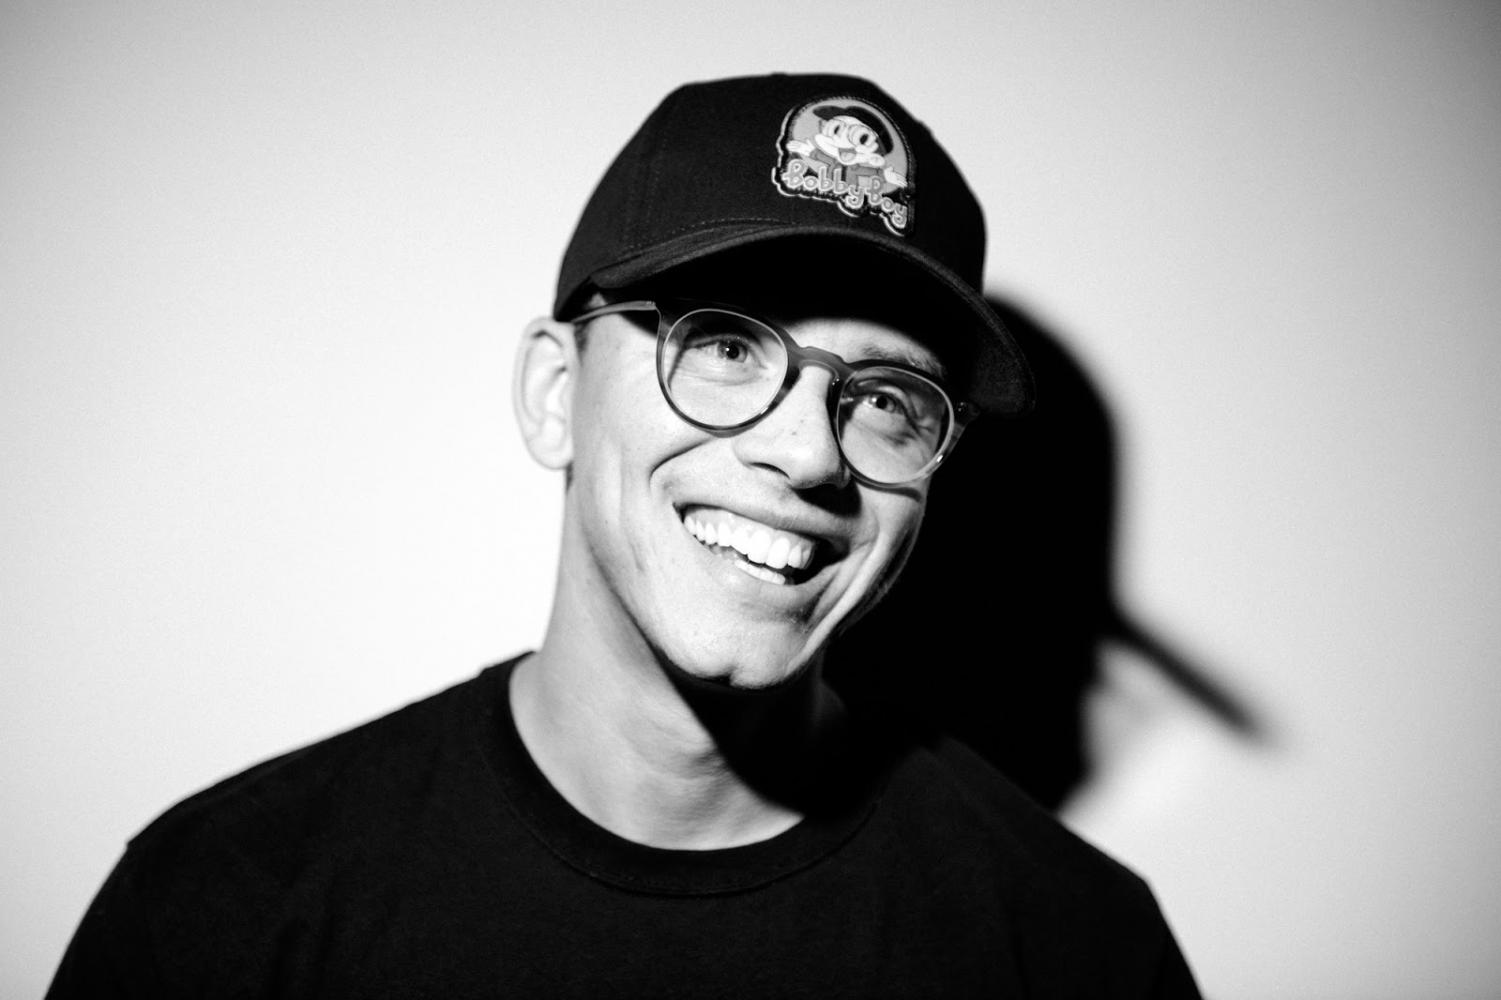 Picture of rapper Logic. Photo Courtesy of rollingstone.com